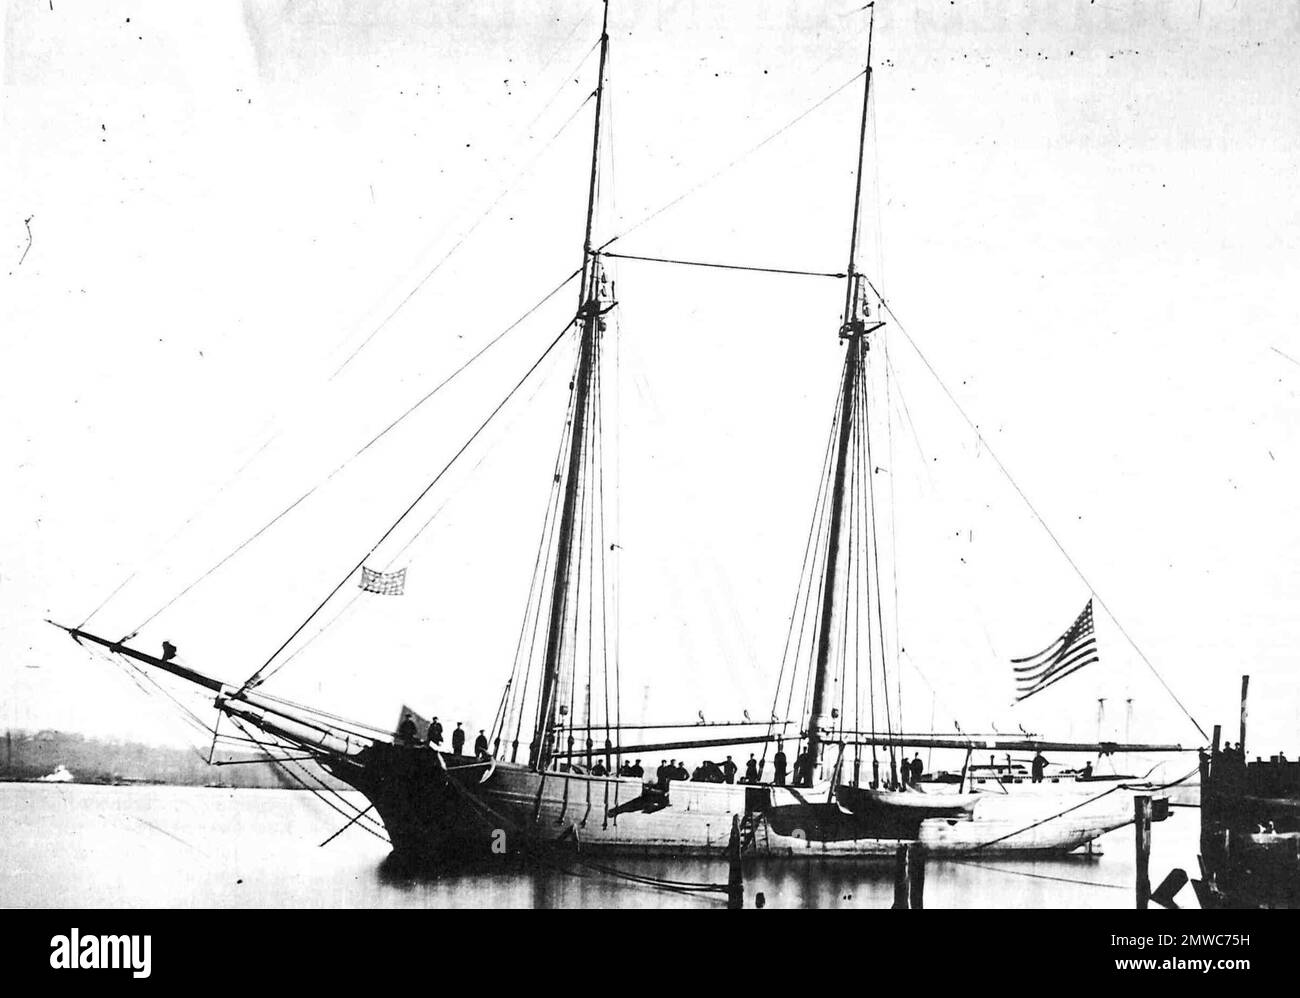 One of the 'bummers', as they were known in the Union Navy. Mortar Schooner of Porter's Bombardment fleet, New Orleans, 1862. A crewman between the masts is leaning on the muzzle of the 13-inch seacoast mortar Stock Photo